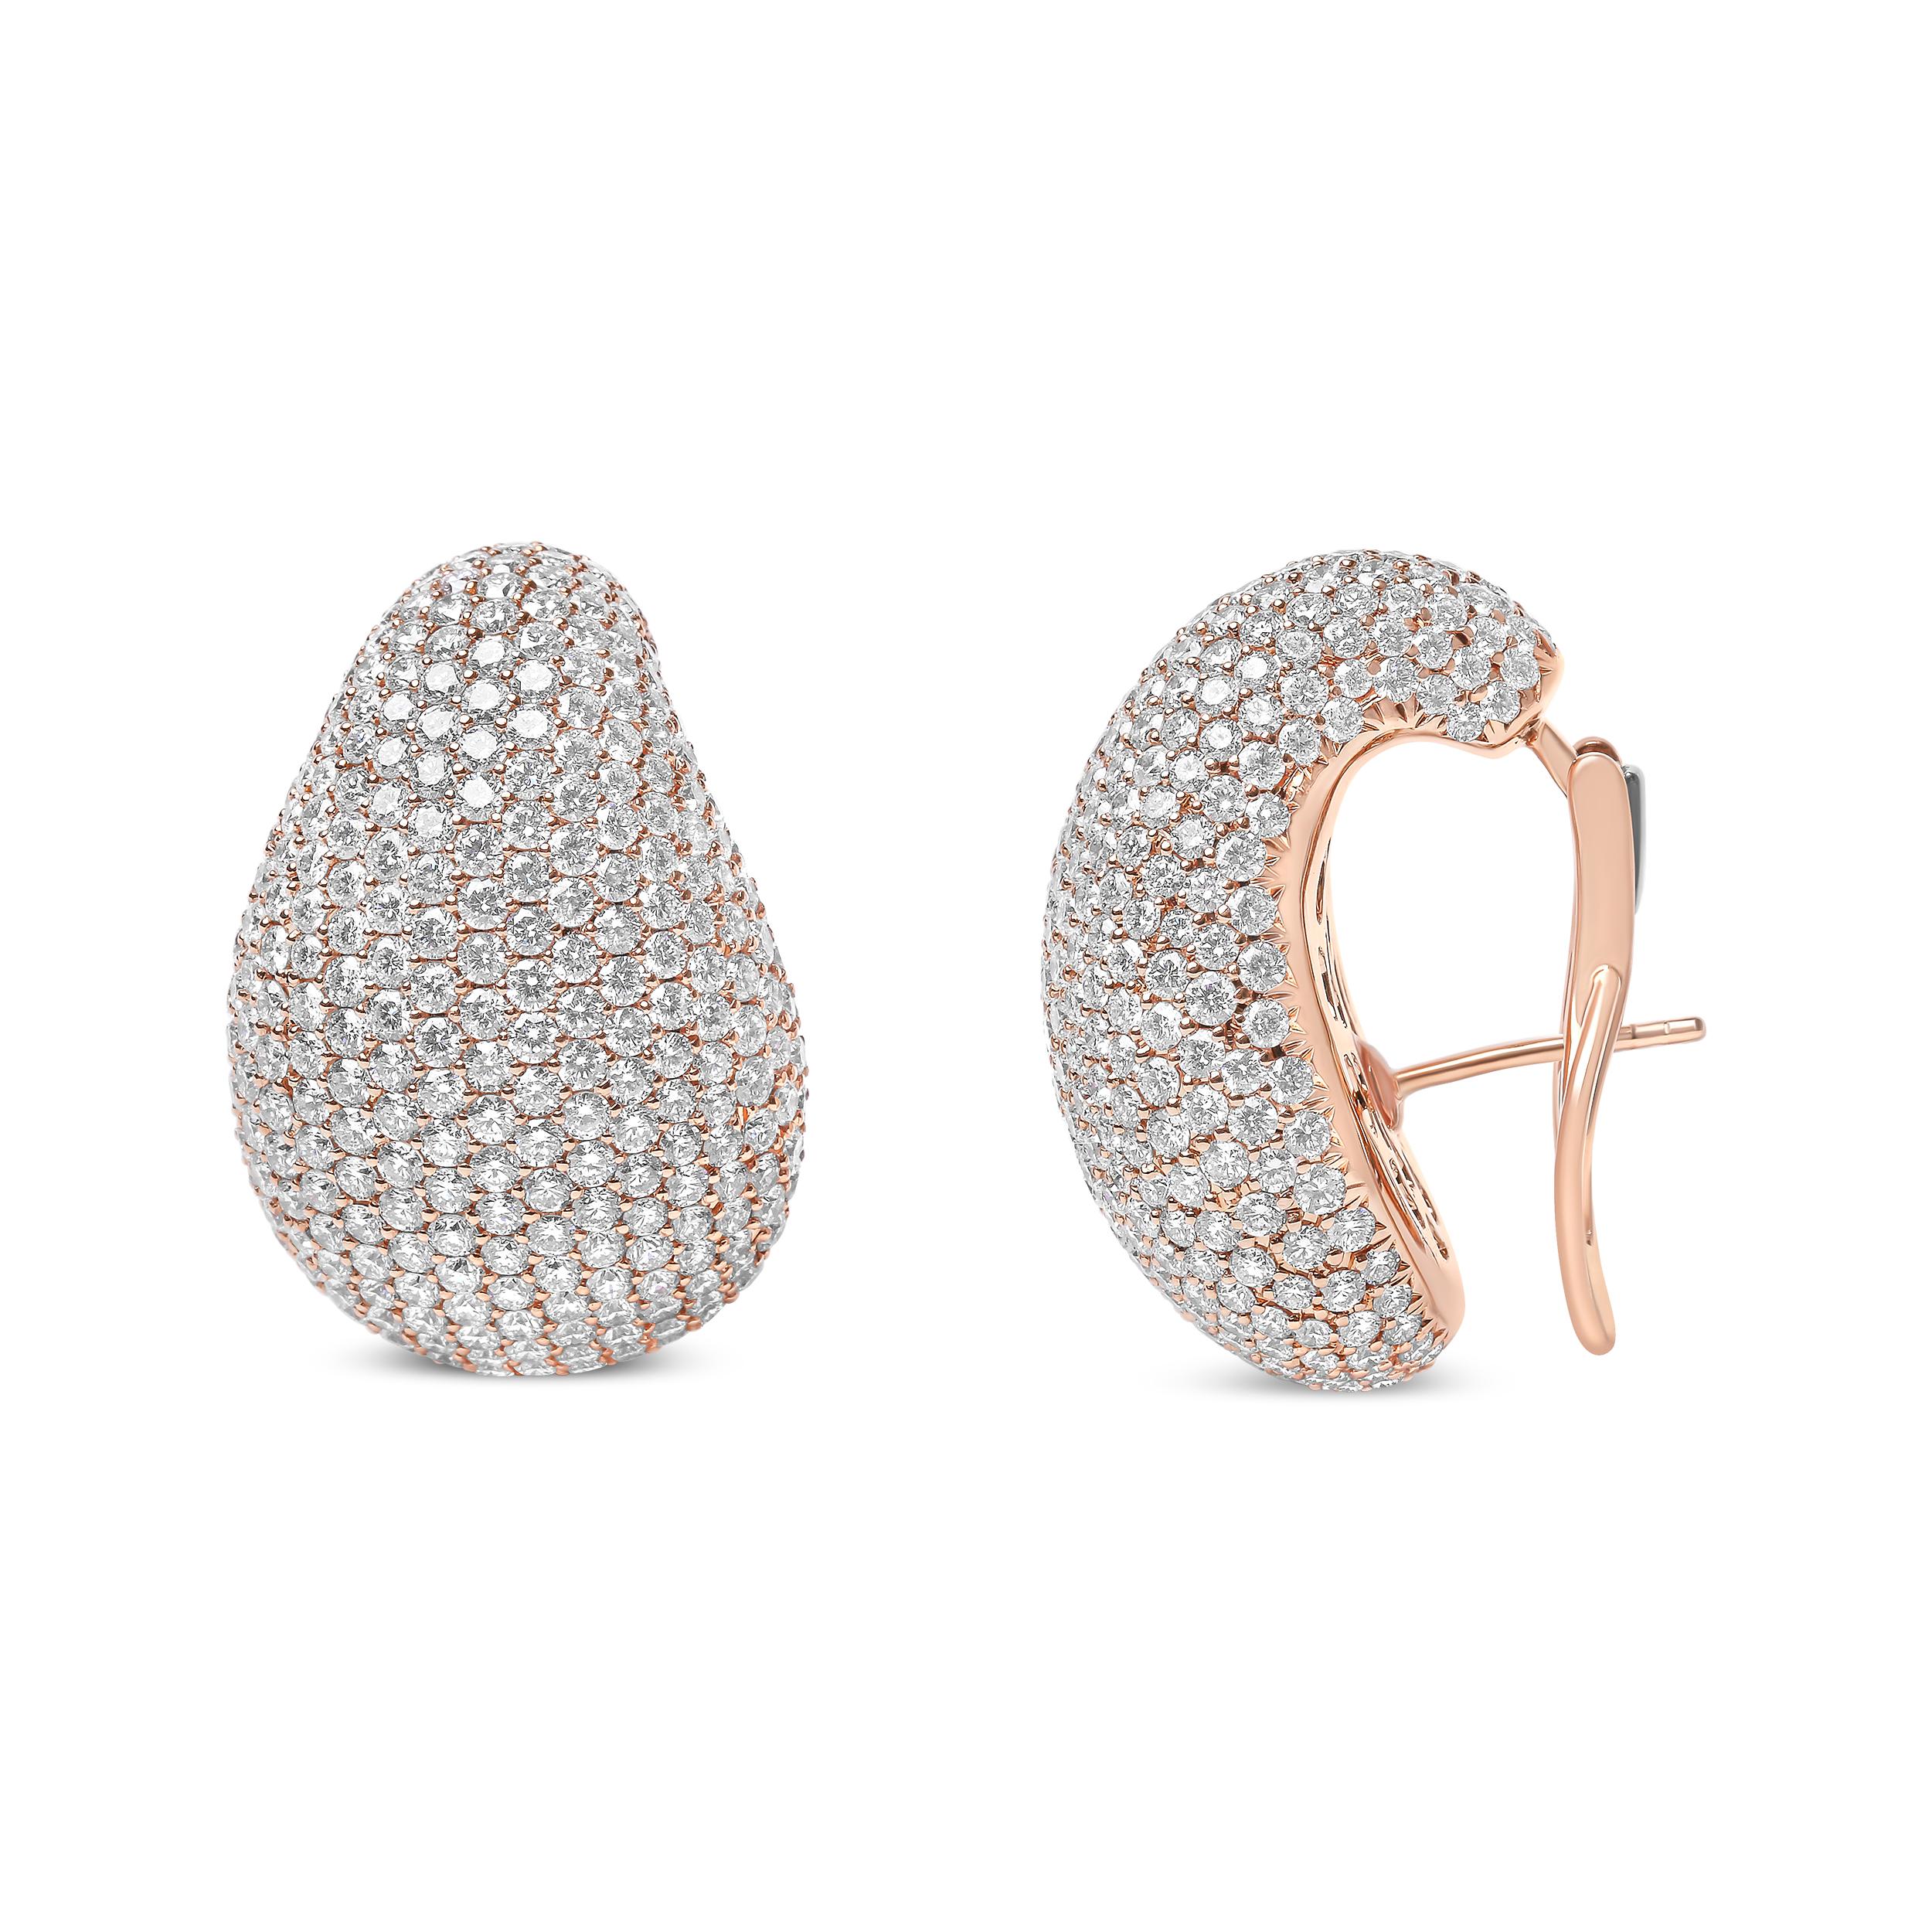 Drenched in the brilliant sparkle of over 675 total diamonds, these sculptural stud earrings display their dazzling wealth in pave settings in an all-over design of ultimate glamour. Crafted of genuine 18k rose gold, these domed earrings exude